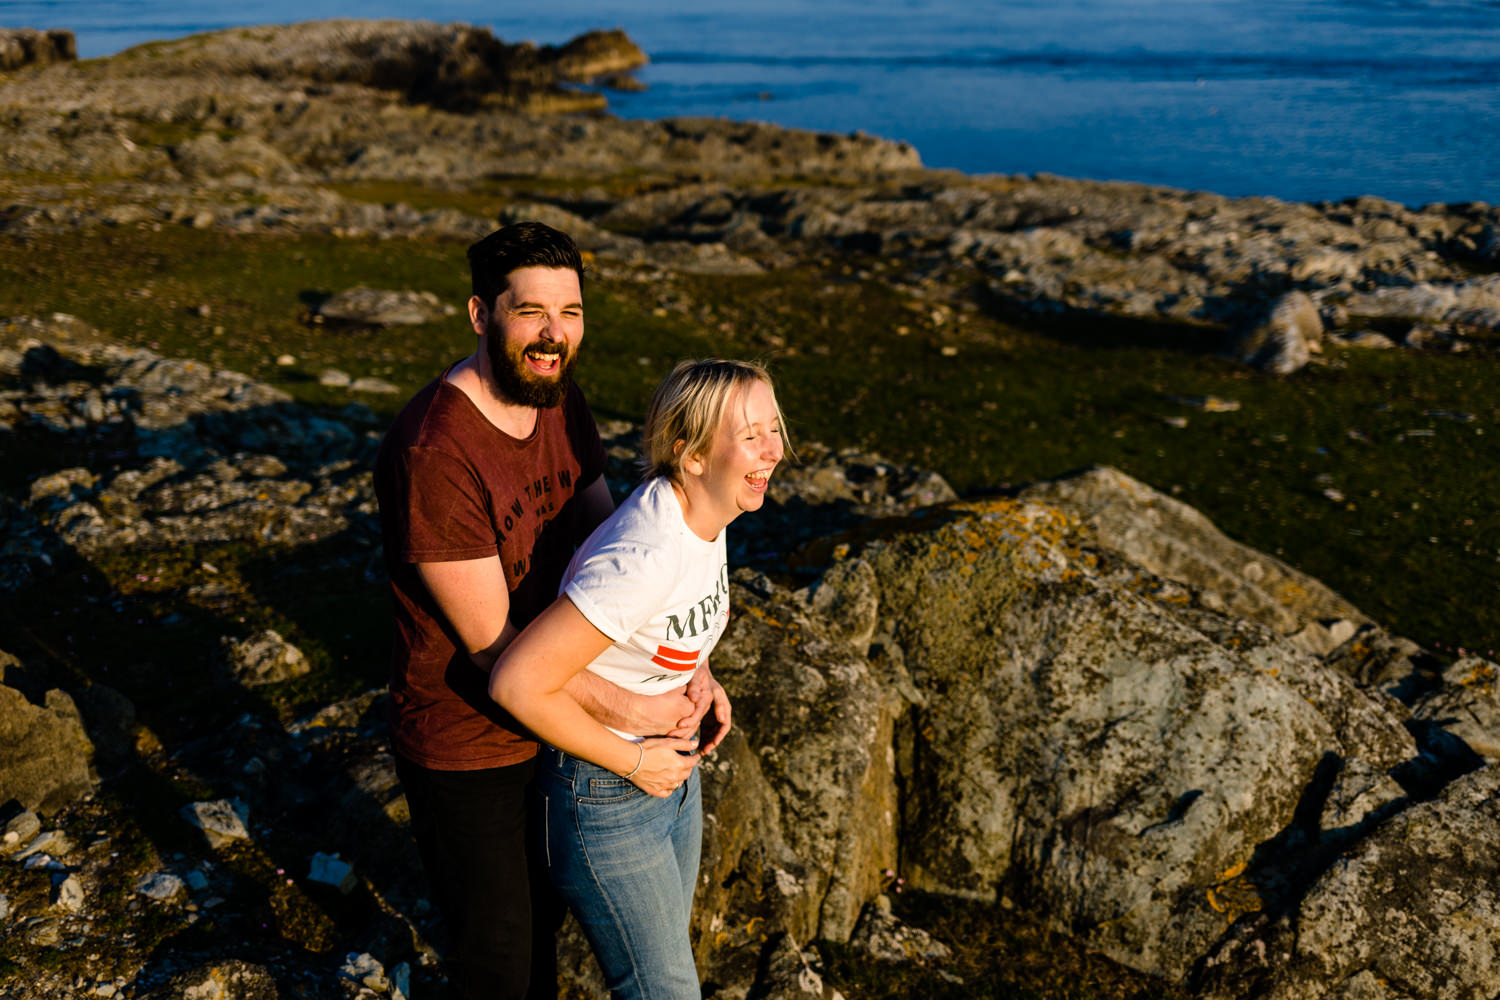 A couple laugh together lit by the golden hour sun on the headland in Anglesey.